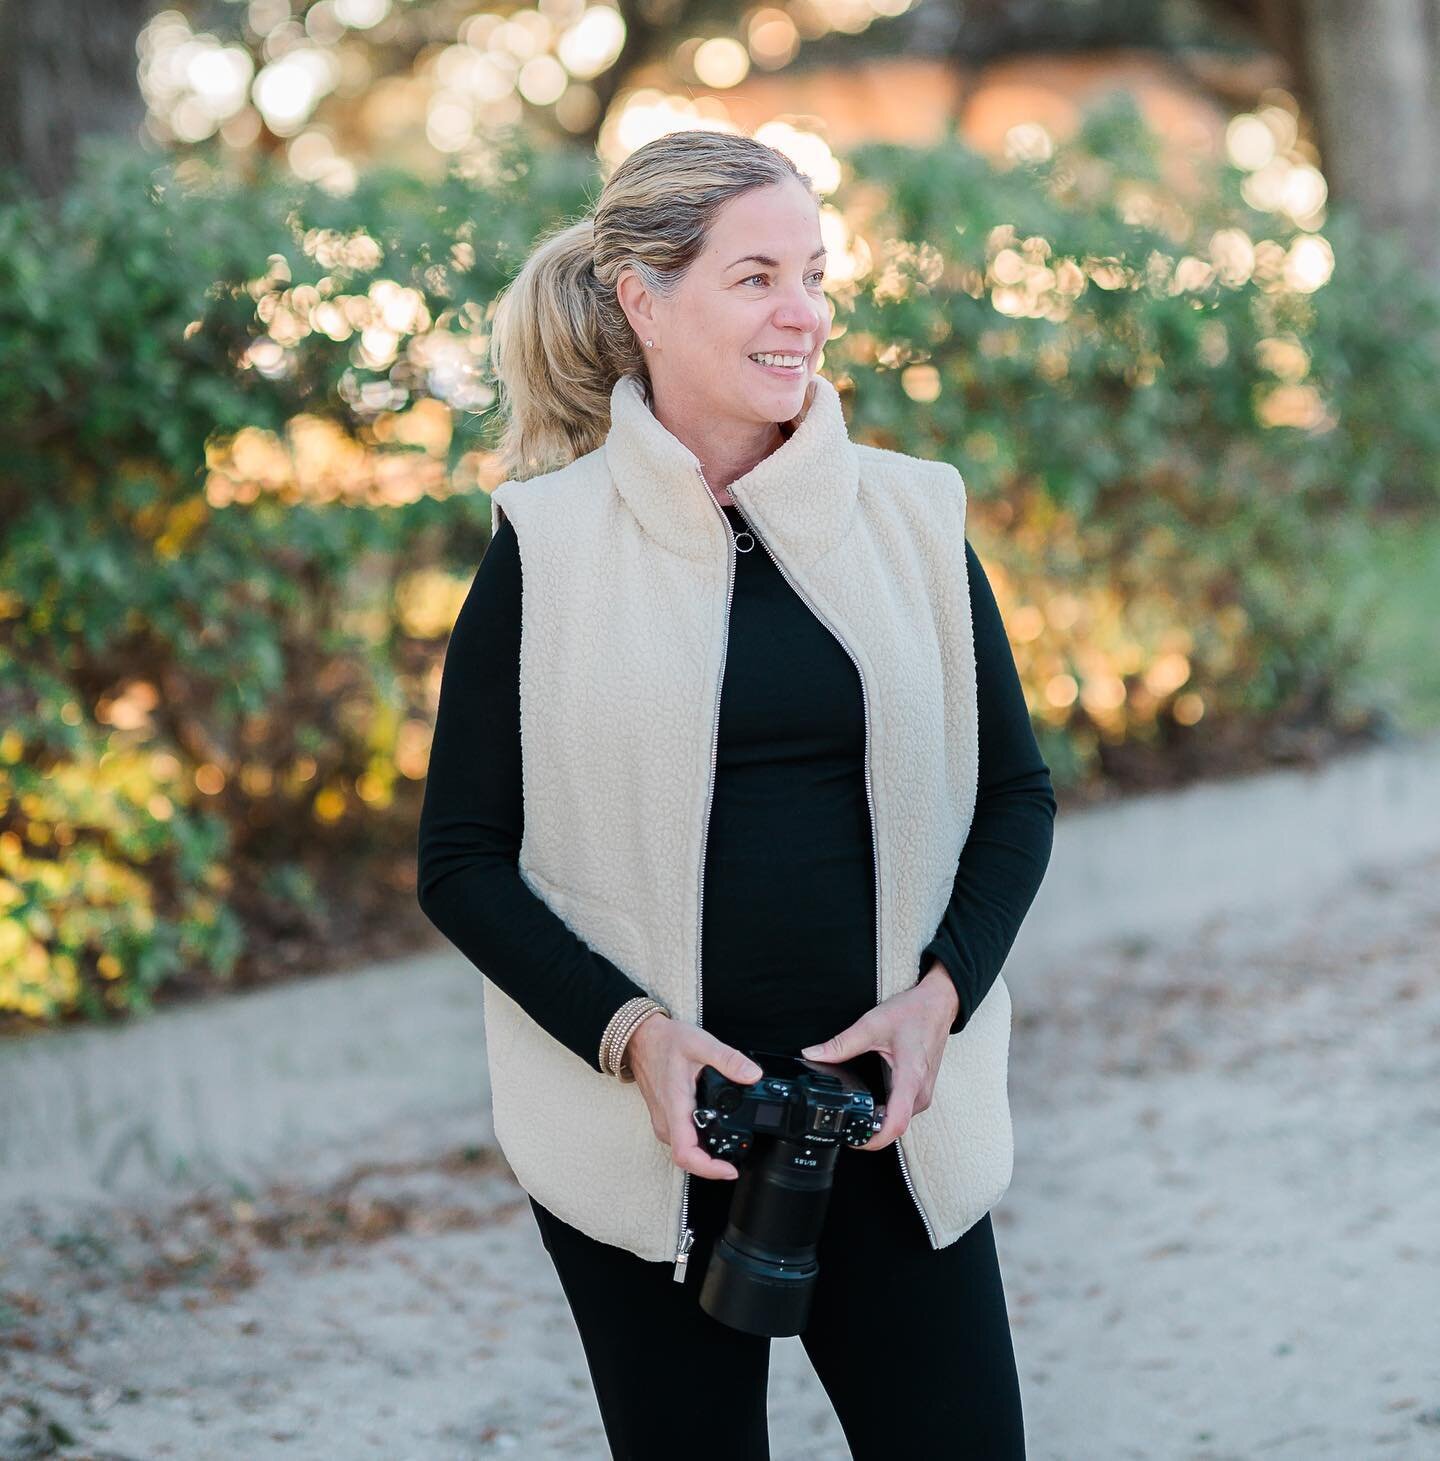 Being a photographer has taught me to slow down so I can really see the beauty around me. When I am not photographing people you will often find me capturing Lowcountry scenes that include street photography, landscapes, and my passion for nature and